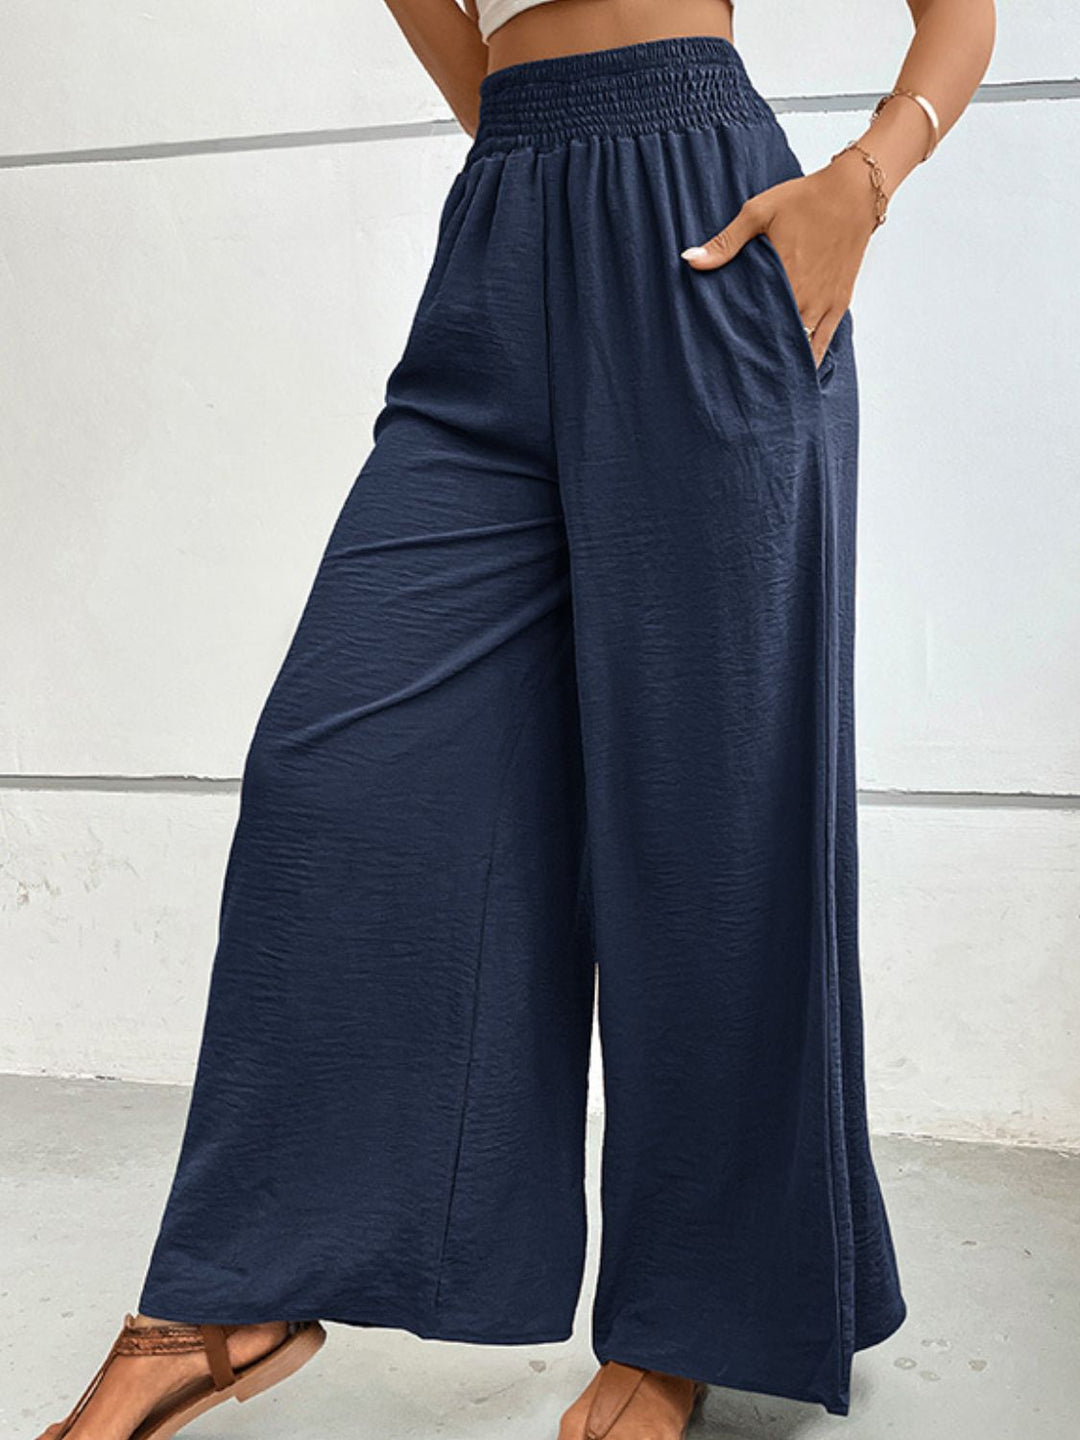 GYPSY-Wide Waistband Relax Fit Long Pants